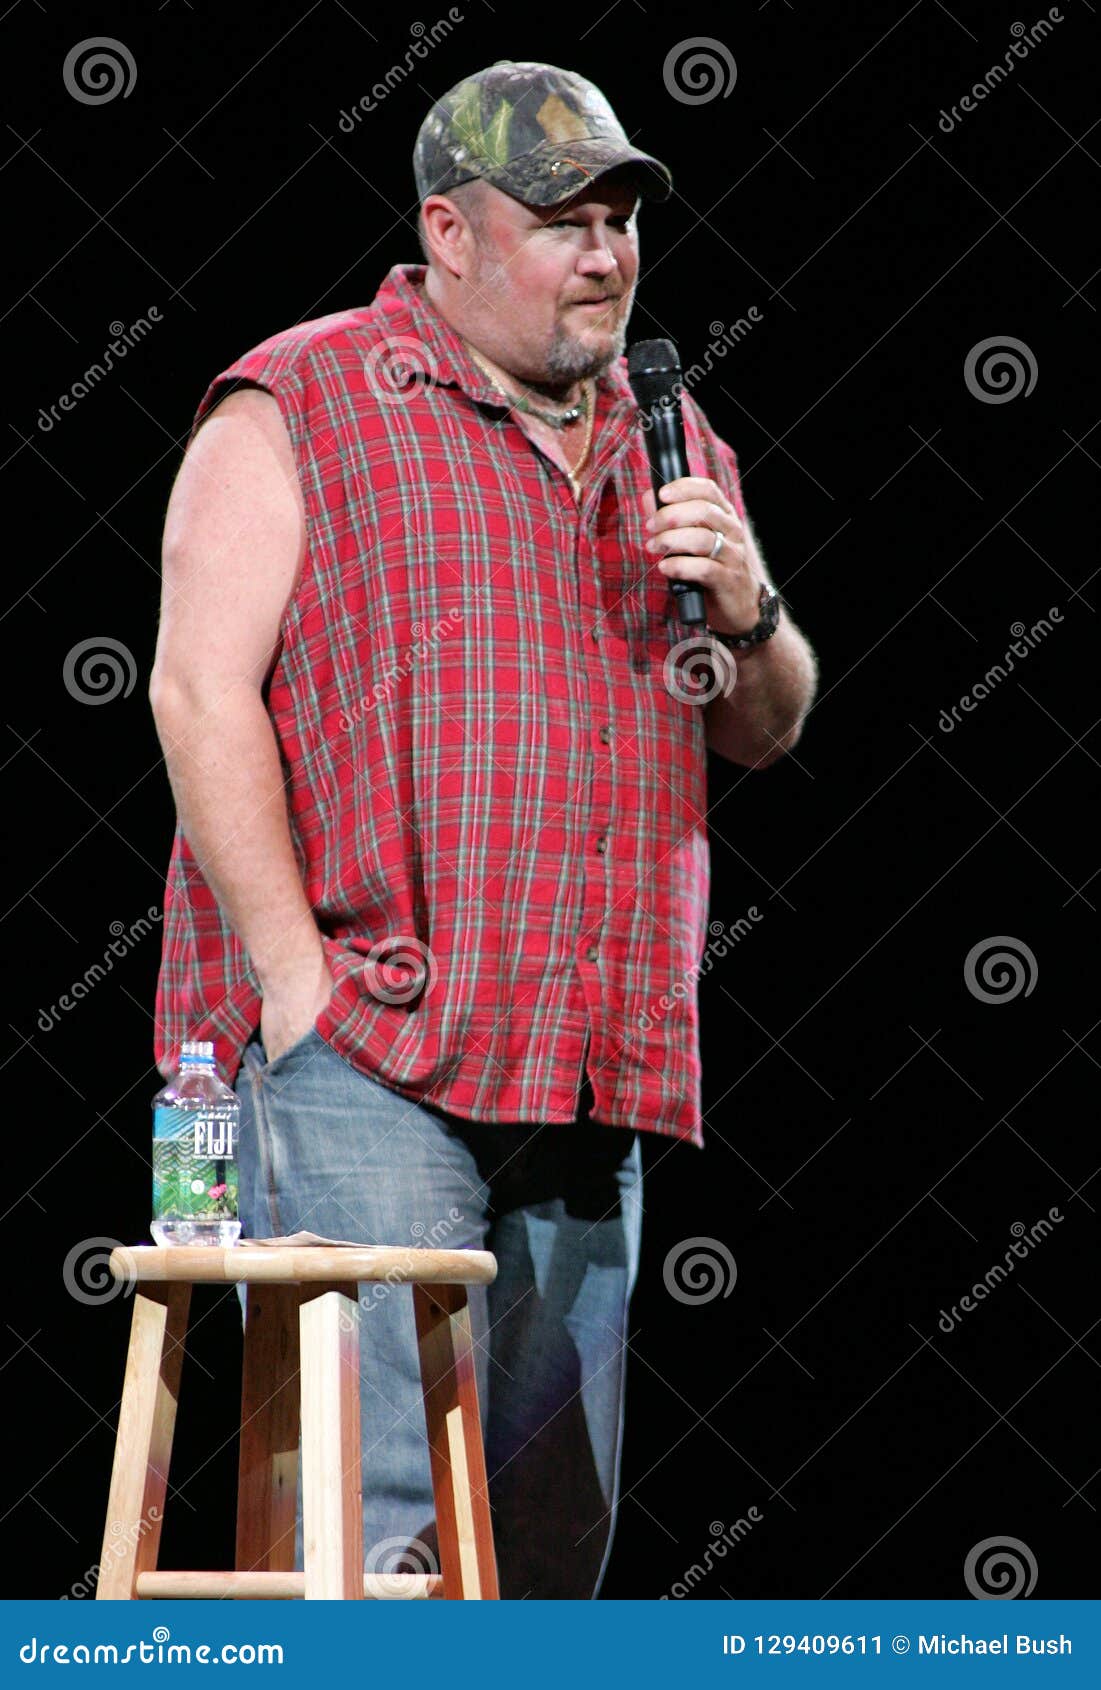 Where Does Larry The Cable Guy Currently Live Larry The Cable Guy Performs Stand Up Editorial Photo - Image of